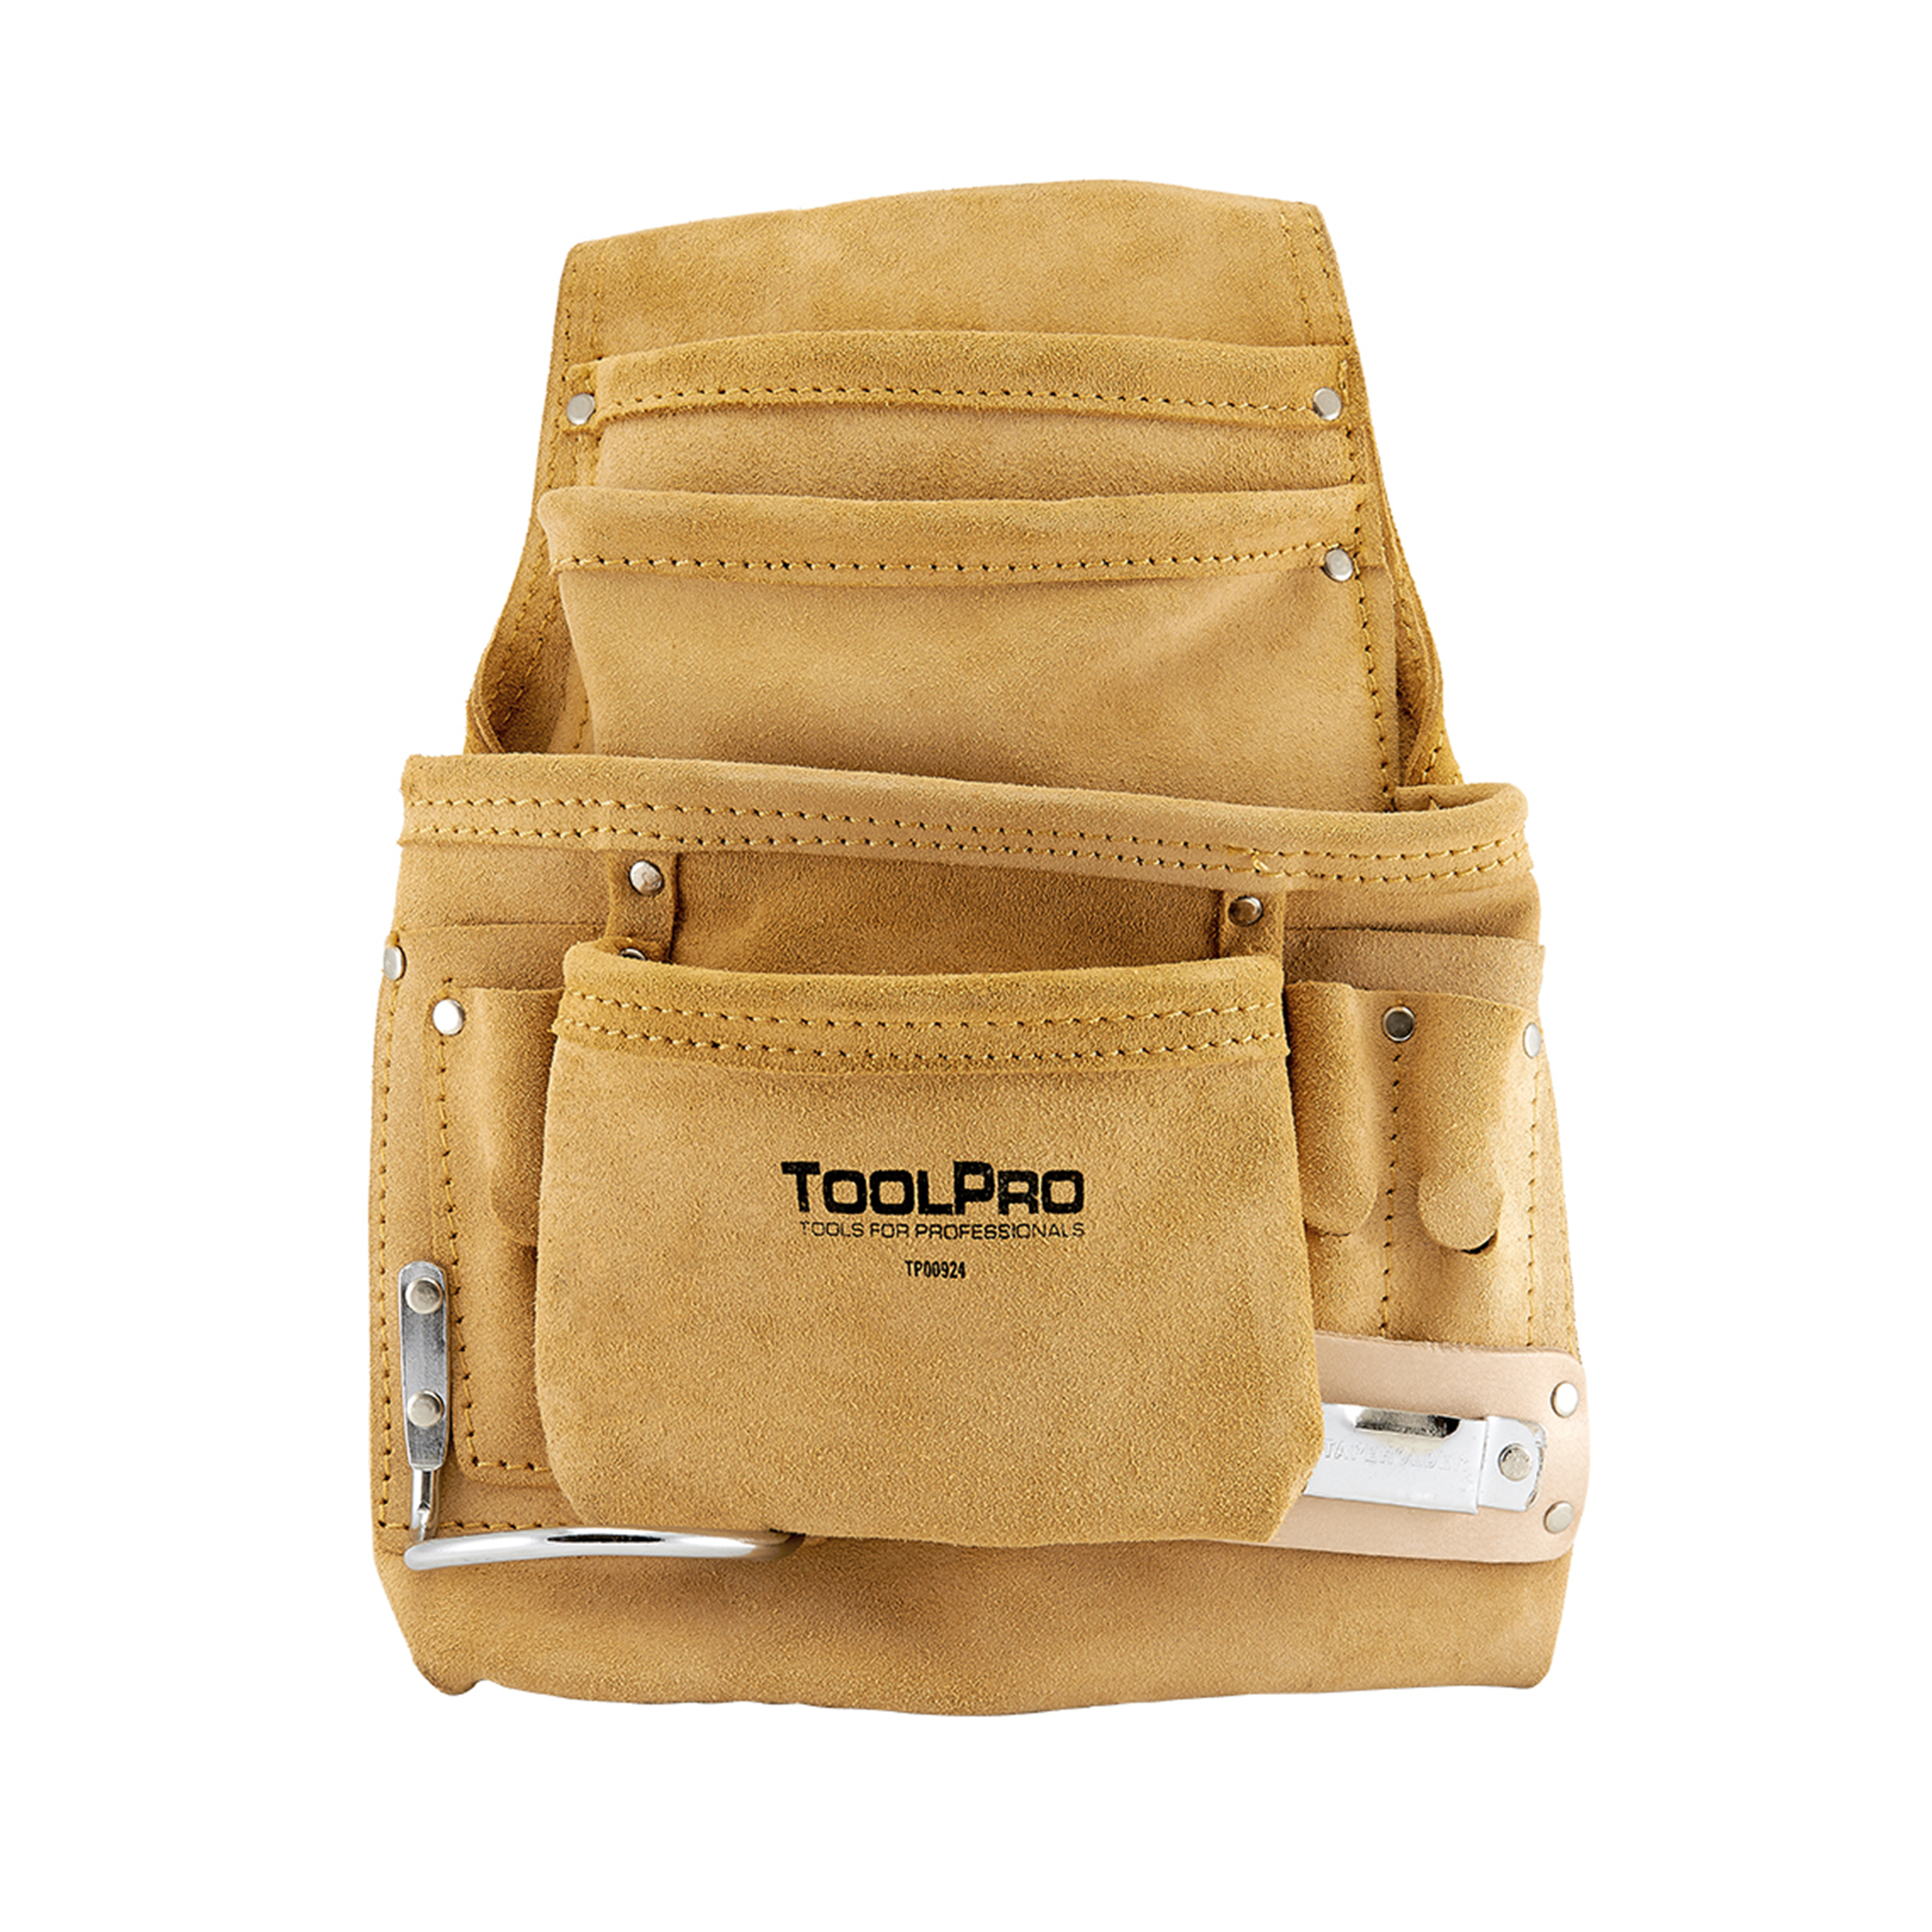 10-pocket Nail And Tool Pouch, Suede Leather